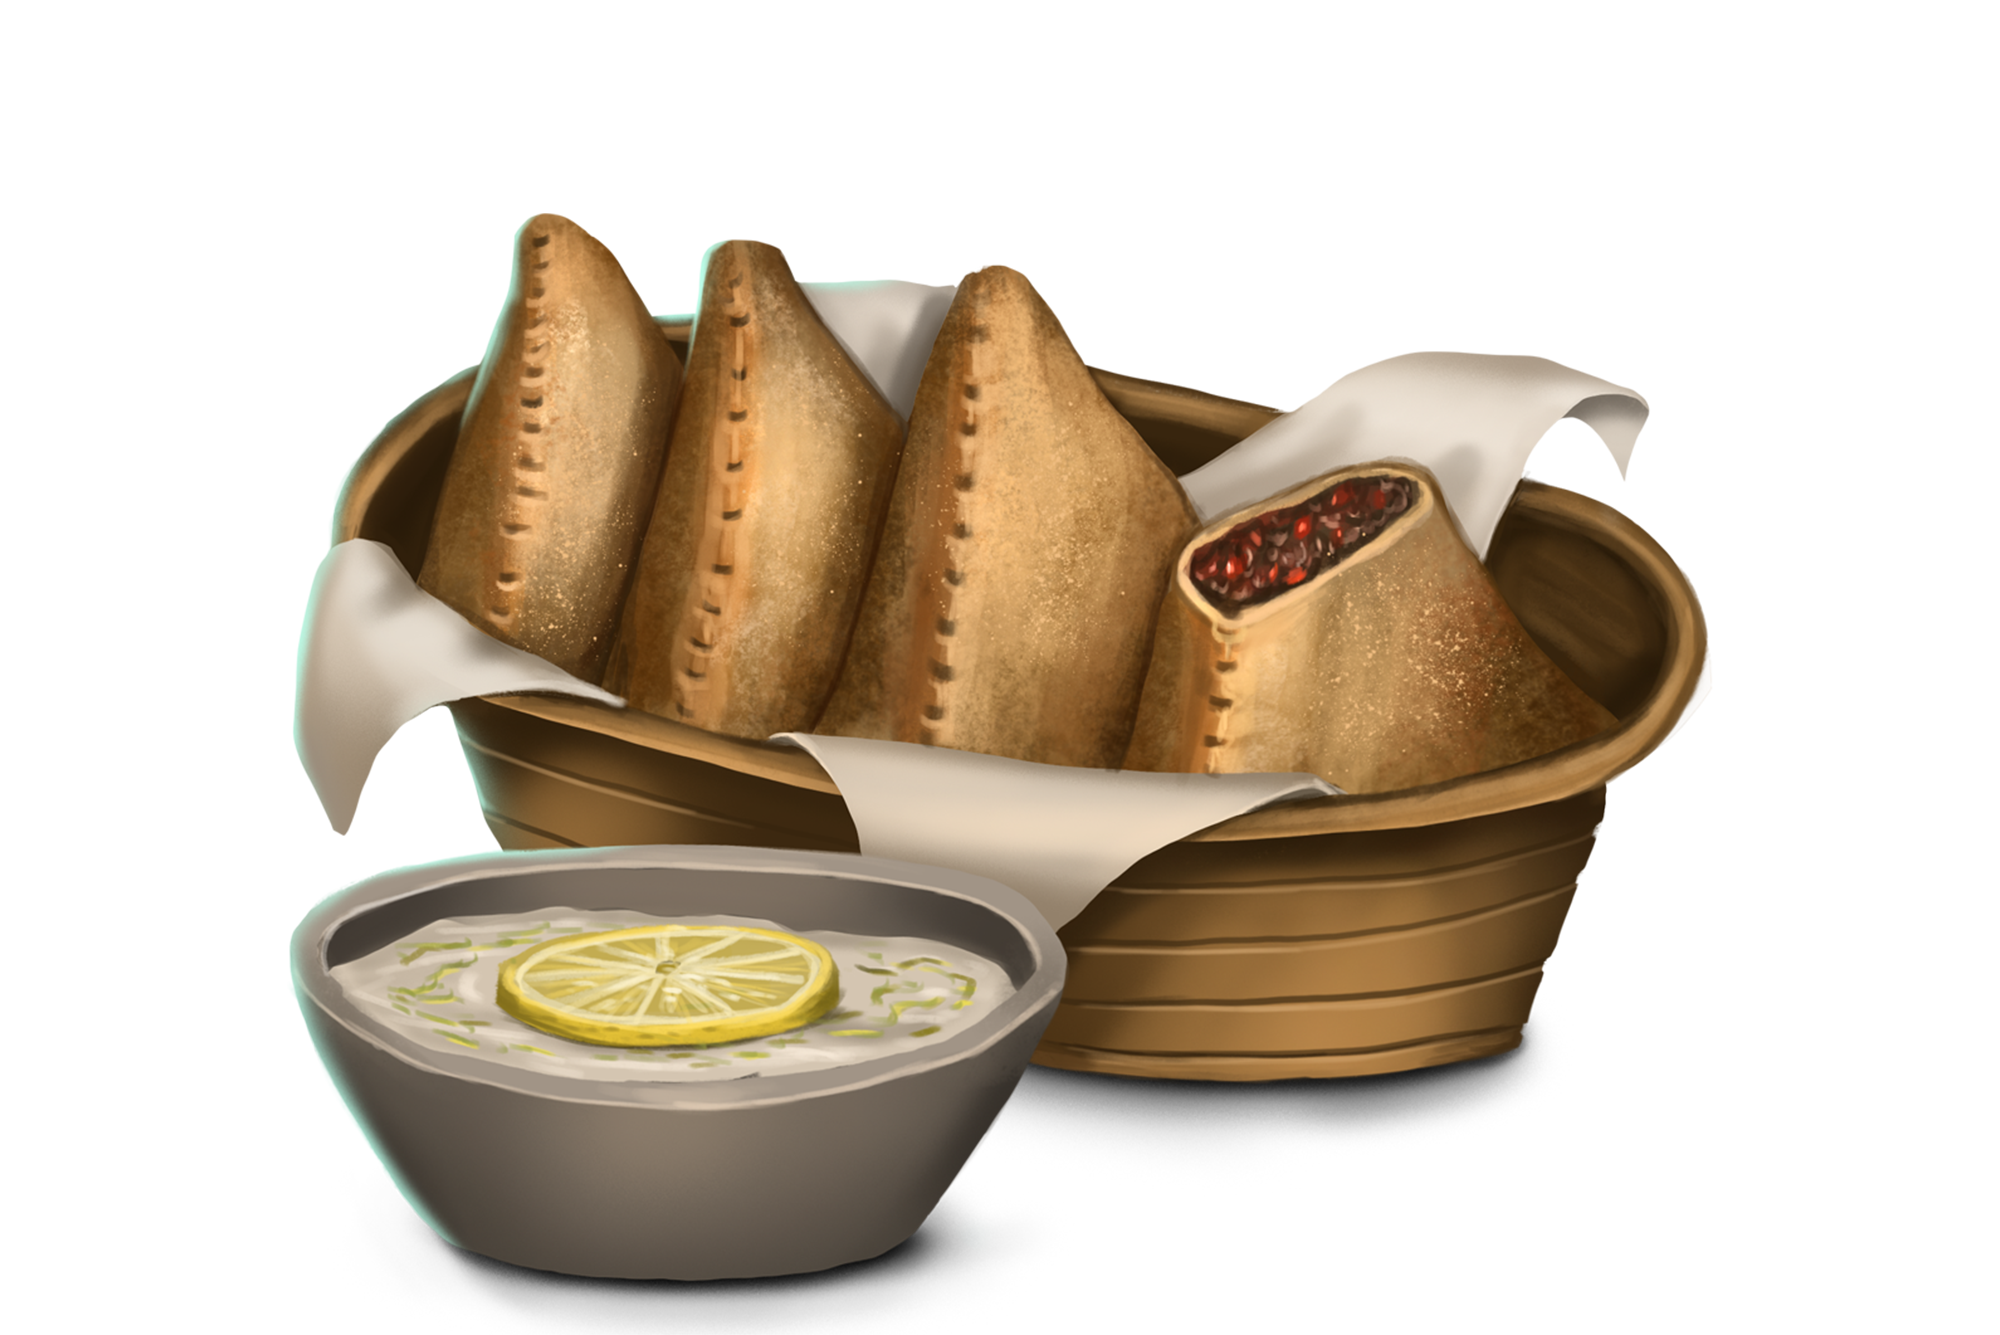 Illustration by Gislaine Avila: A basket holding multiple triangular pastries. One is torn open, exposing the cooked meat within. The pastries are served with a side of chutney.